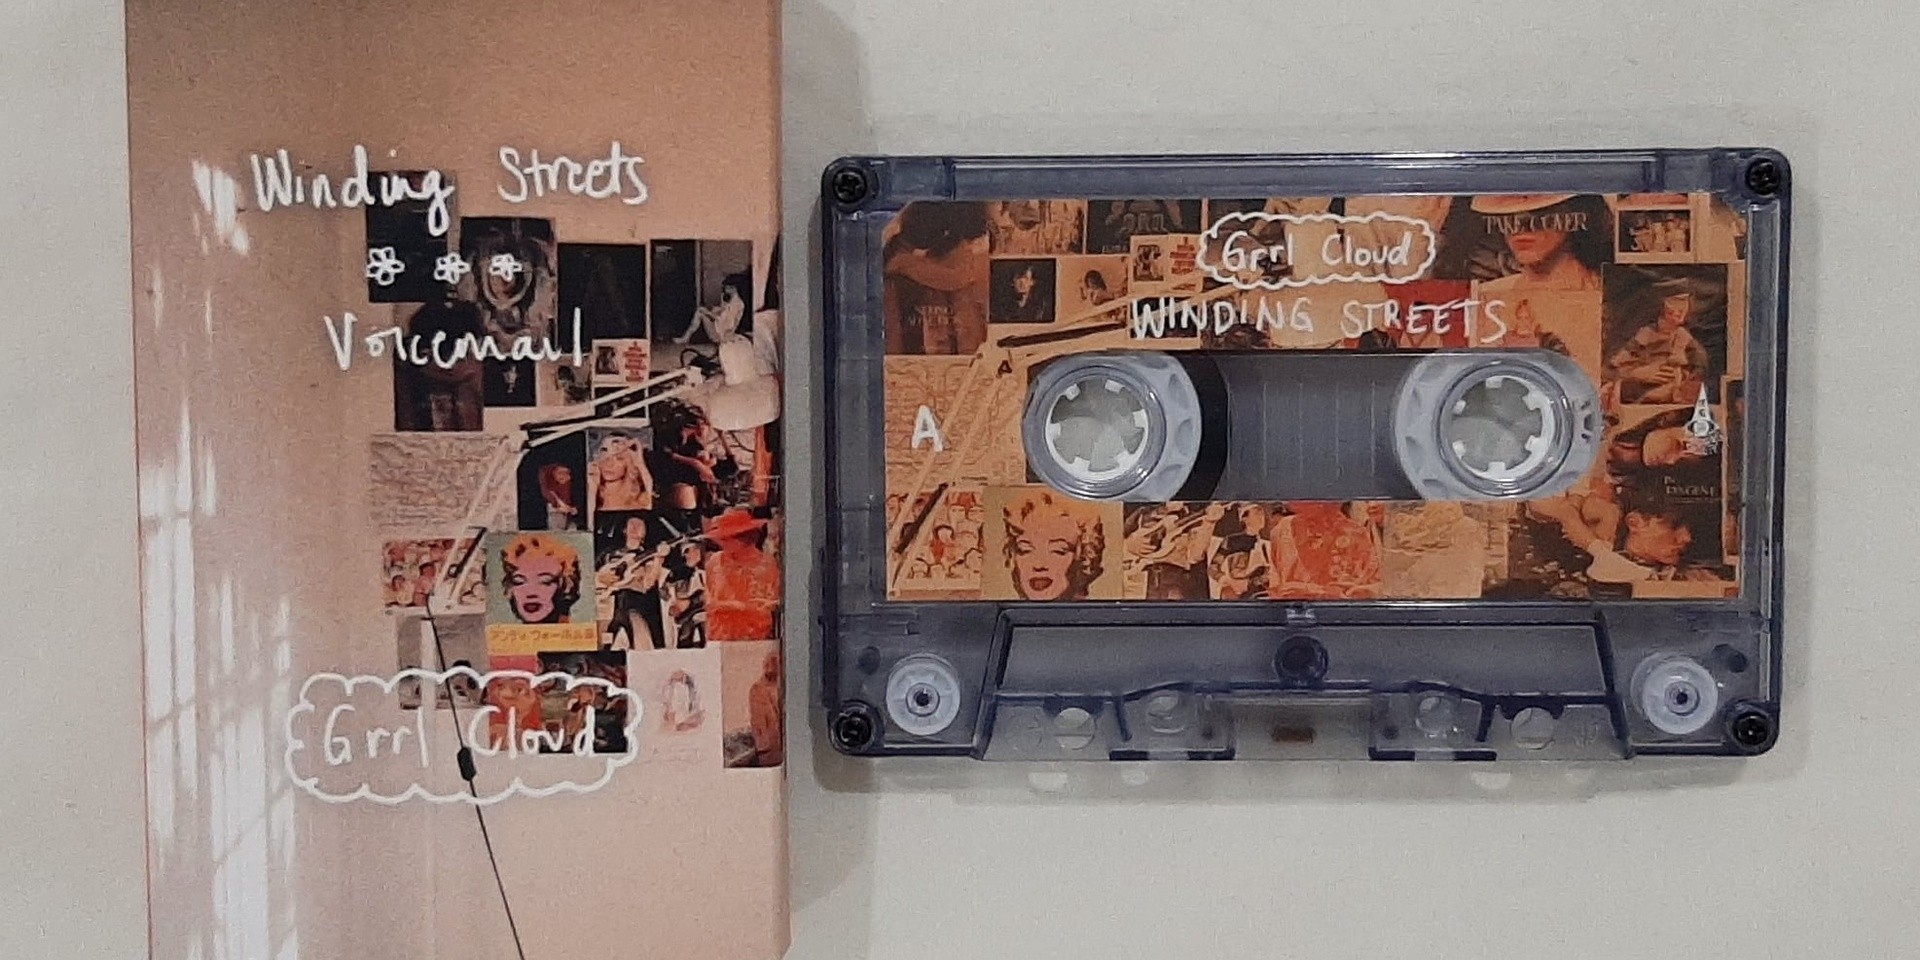 Grrl Cloud to release limited edition 'Winding Streets / Voicemail' cassette